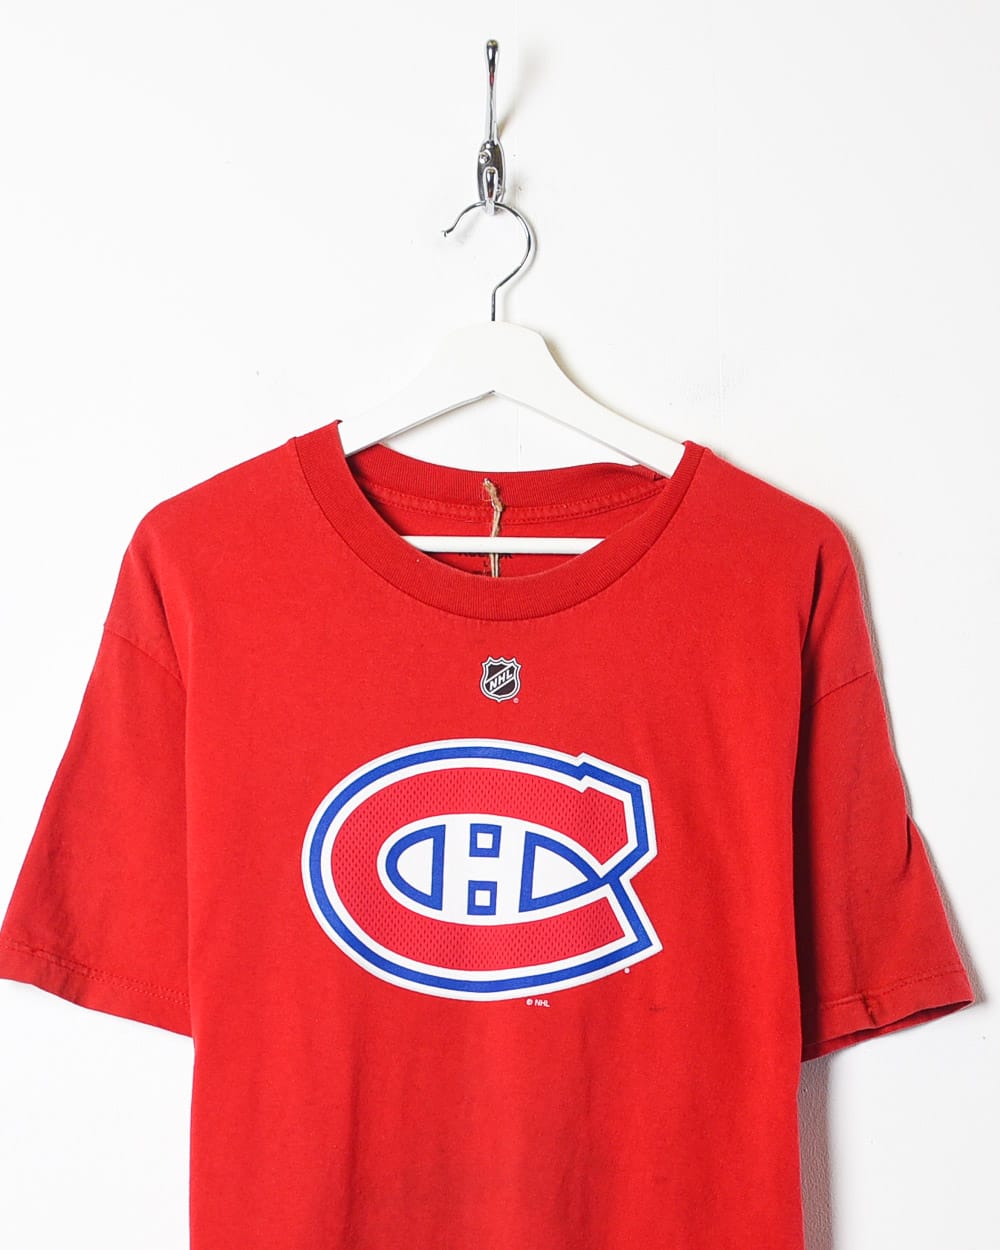 Red Reebok NHL Montreal Canadiens T-Shirt - Large